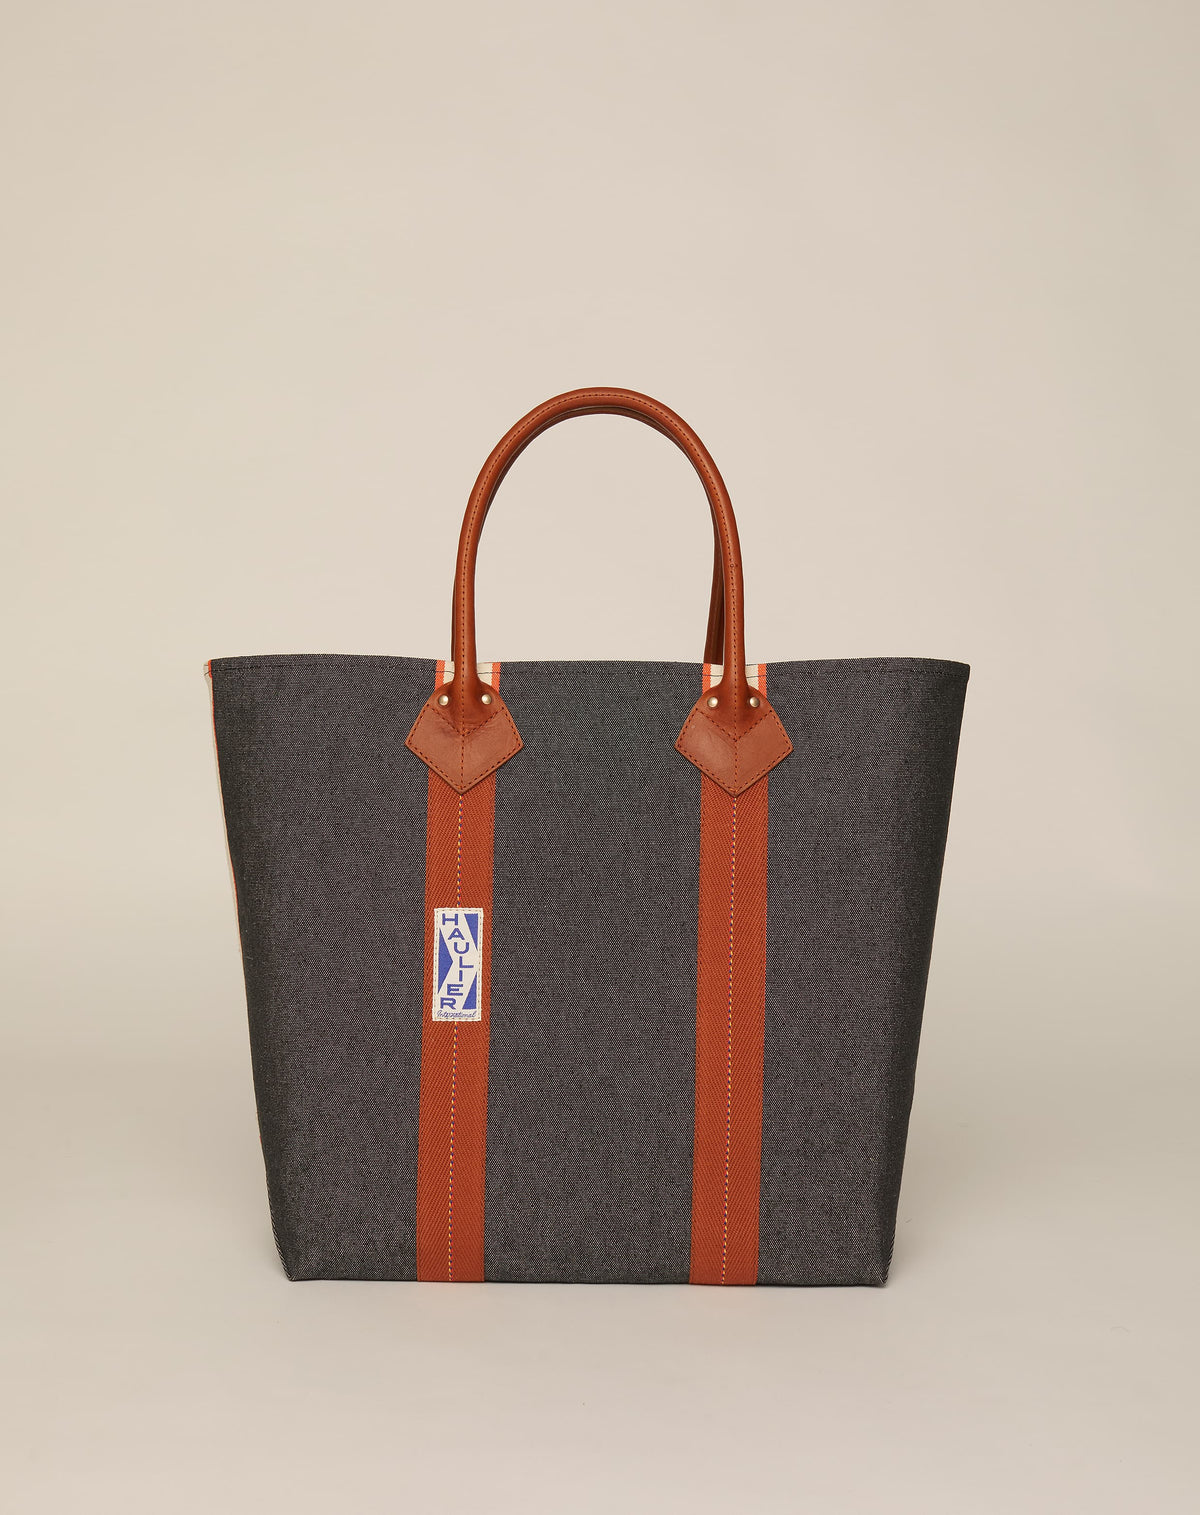 Image of medium-sized classic canvas tote bag in washed black colour with tan leather handles and contrasting stripes.